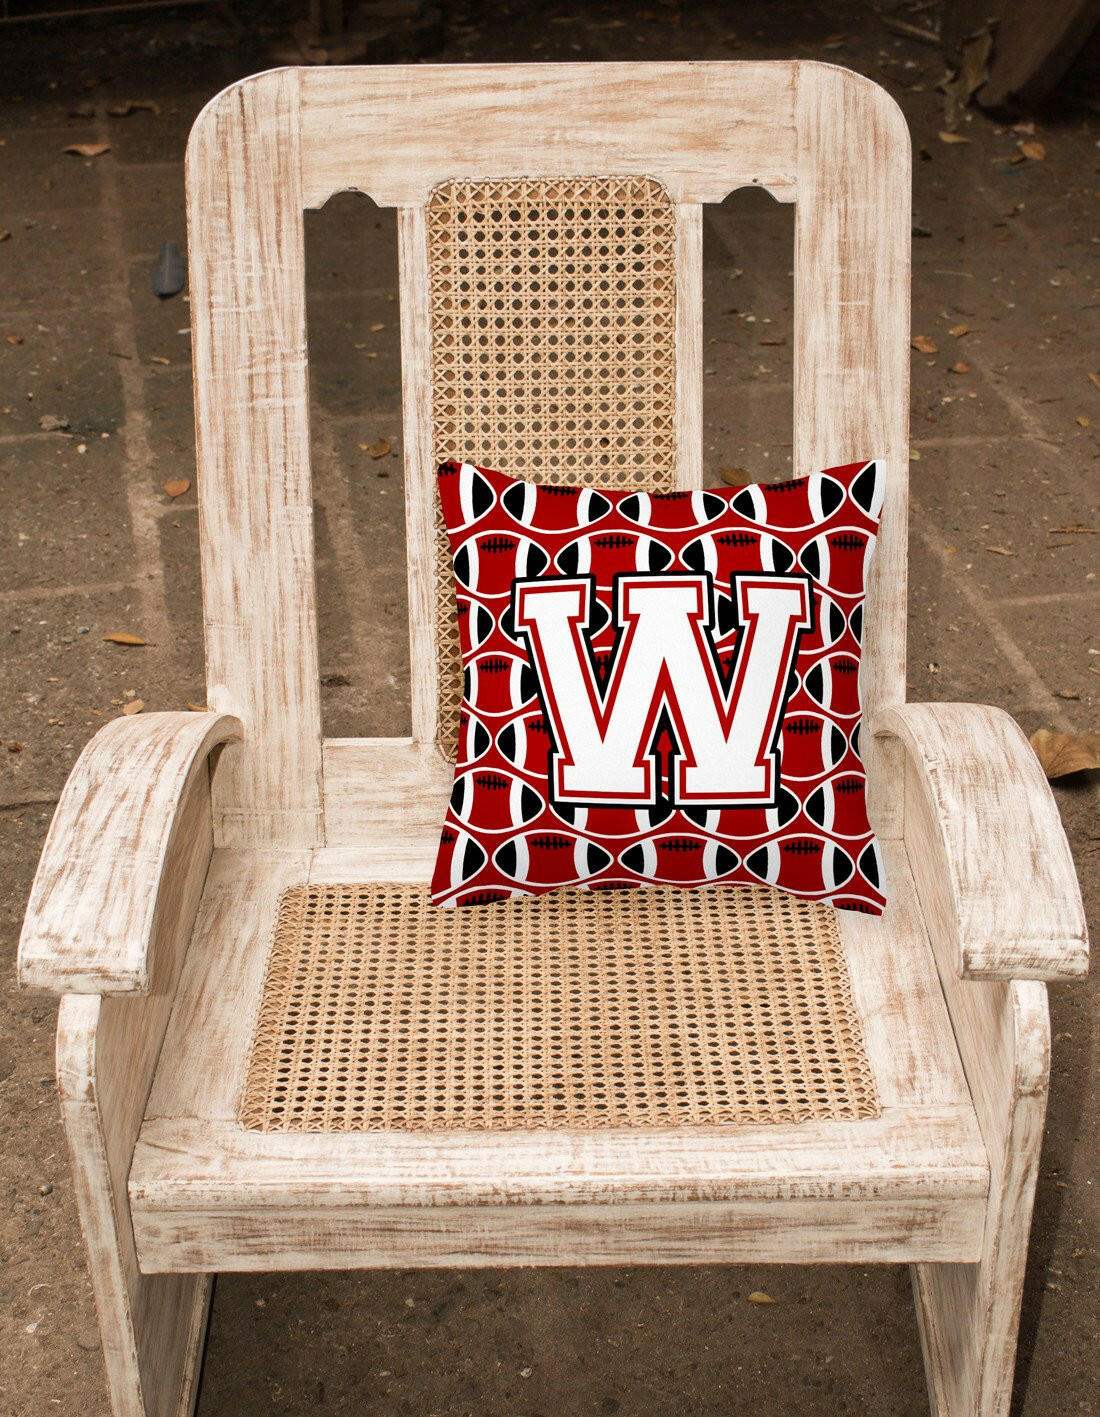 Letter W Football Cardinal and White Fabric Decorative Pillow CJ1082-WPW1414 by Caroline's Treasures